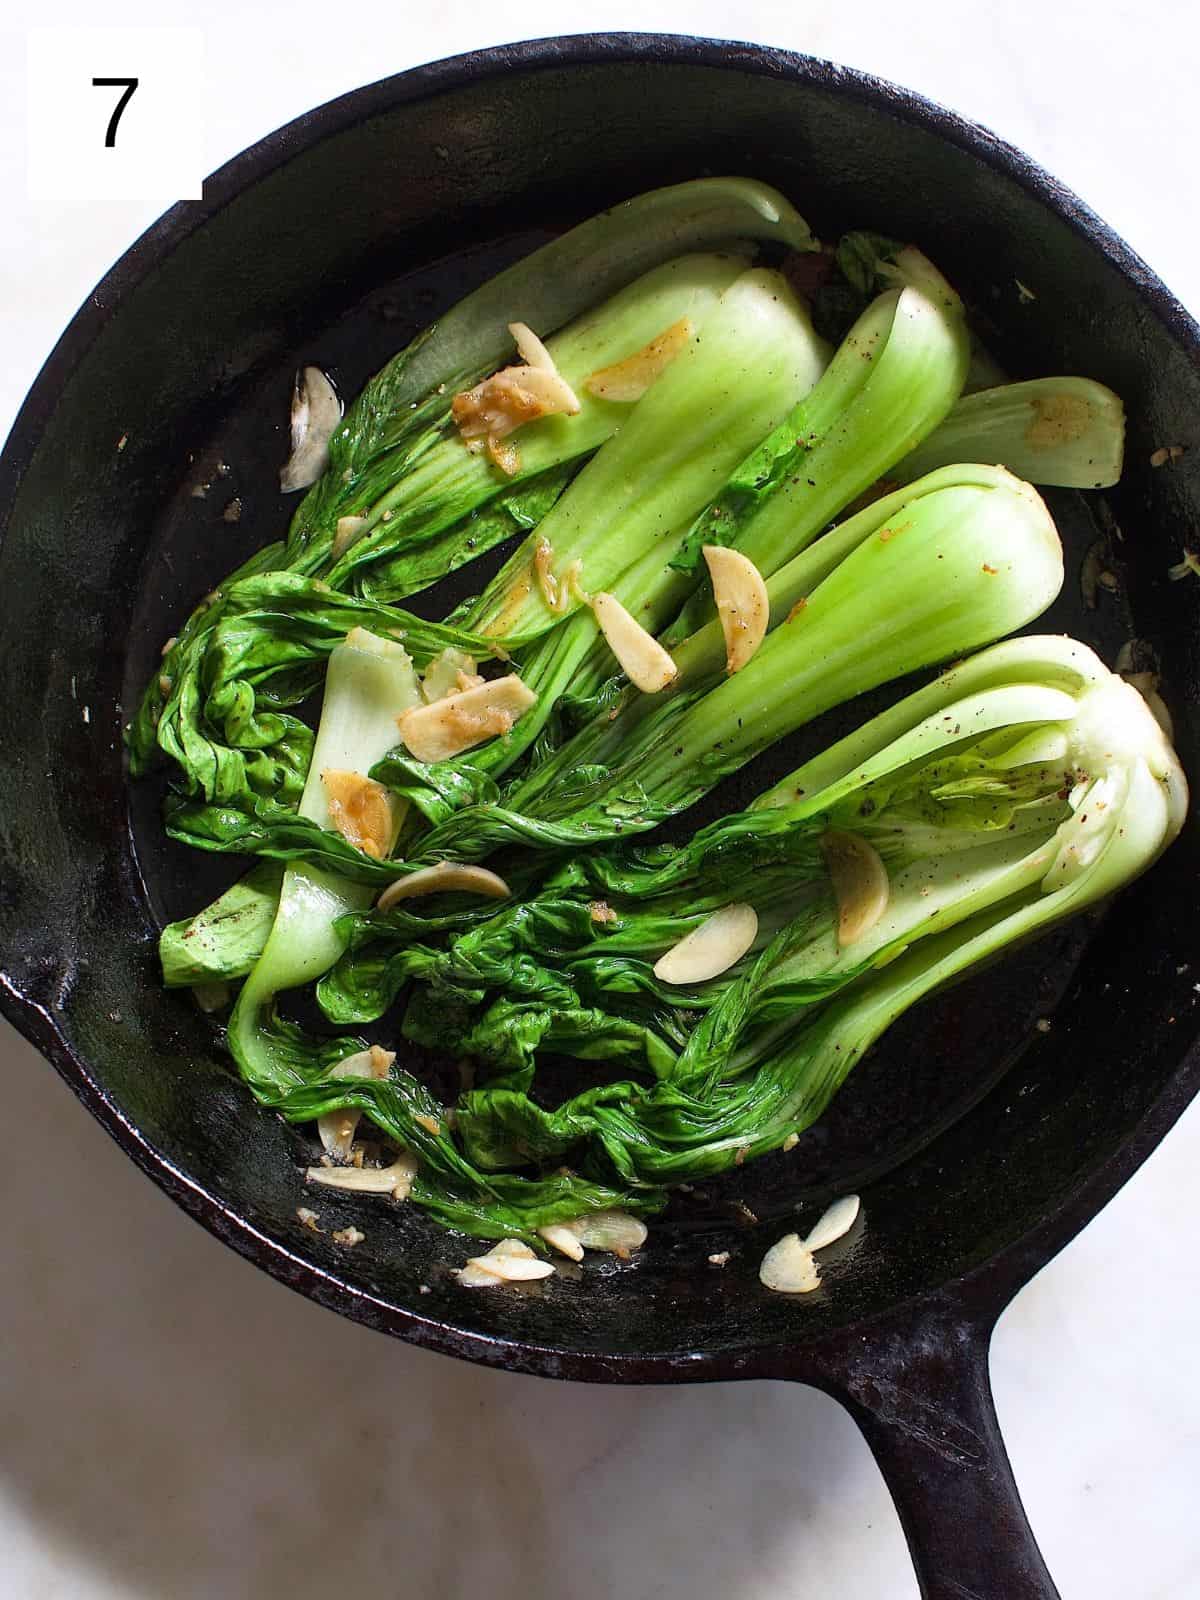 cooked bok choy seasoned with garlic, ginger, and other spices in a cast iron.